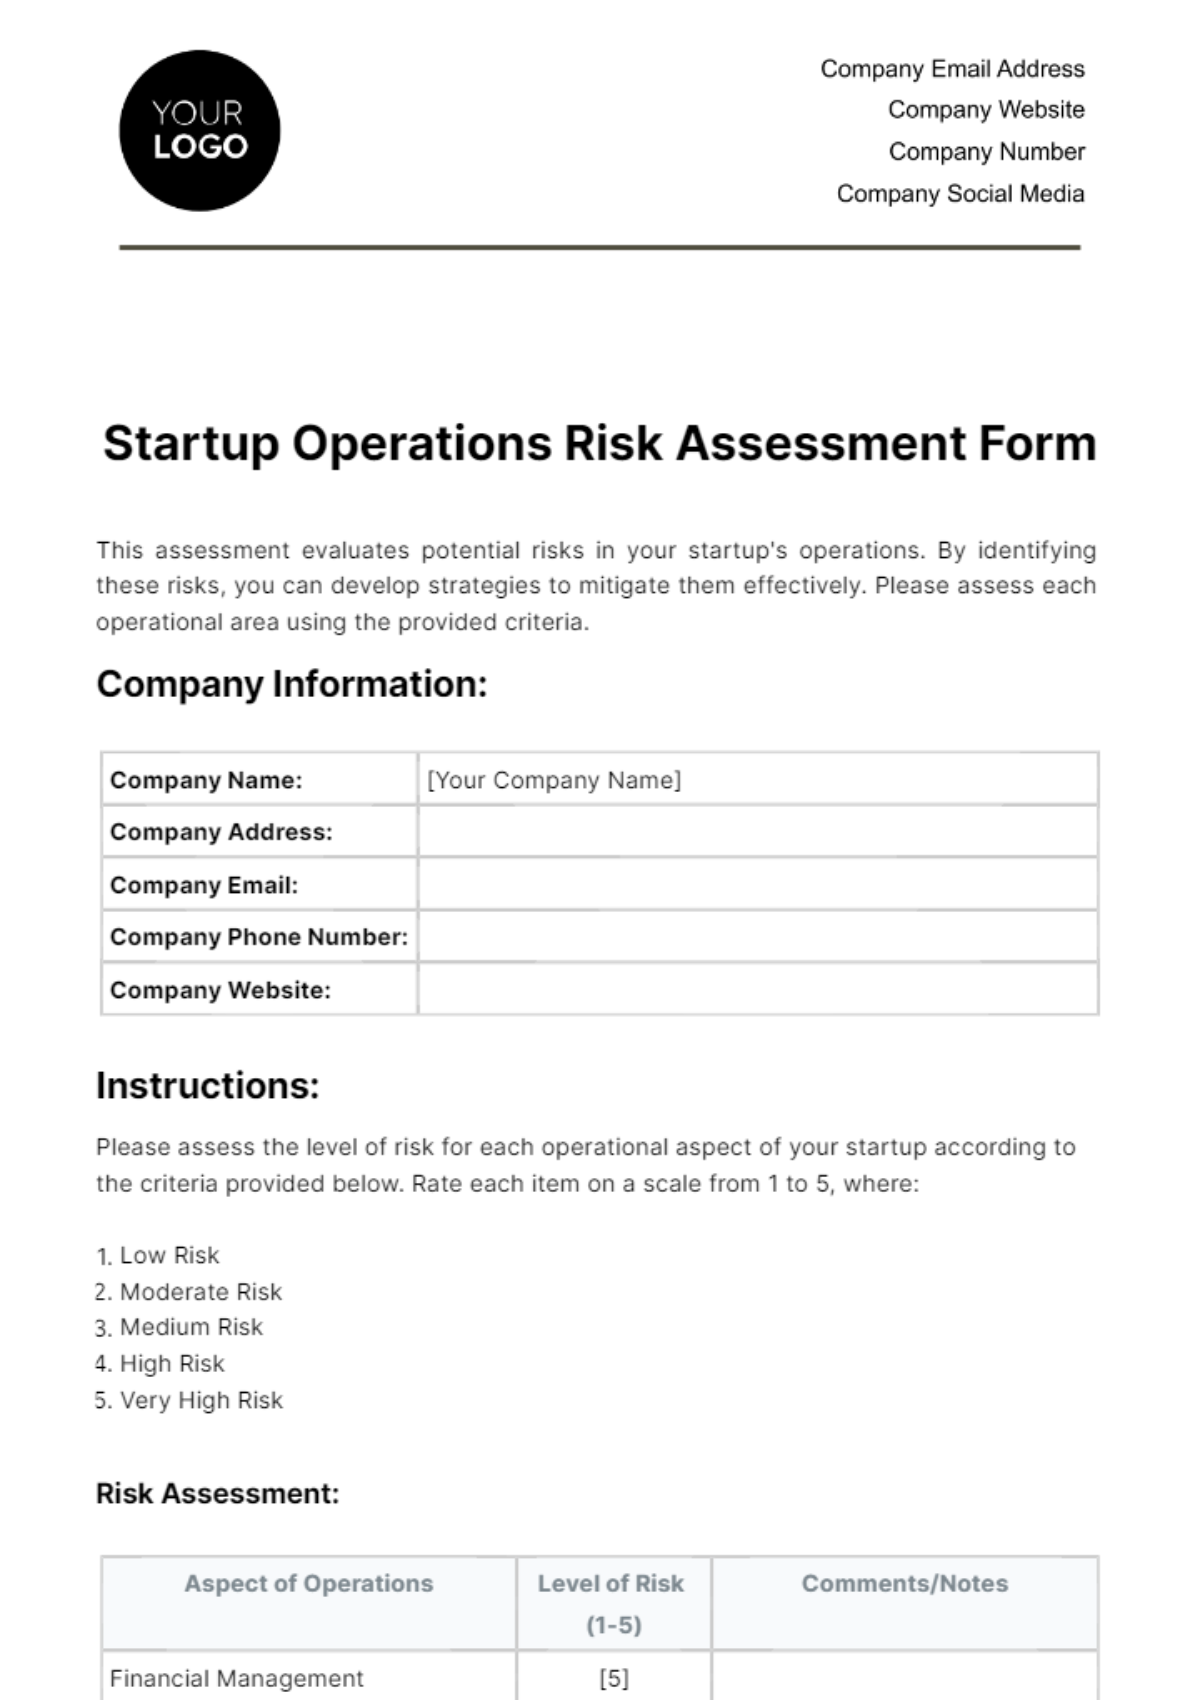 Startup Operations Risk Assessment Form Template